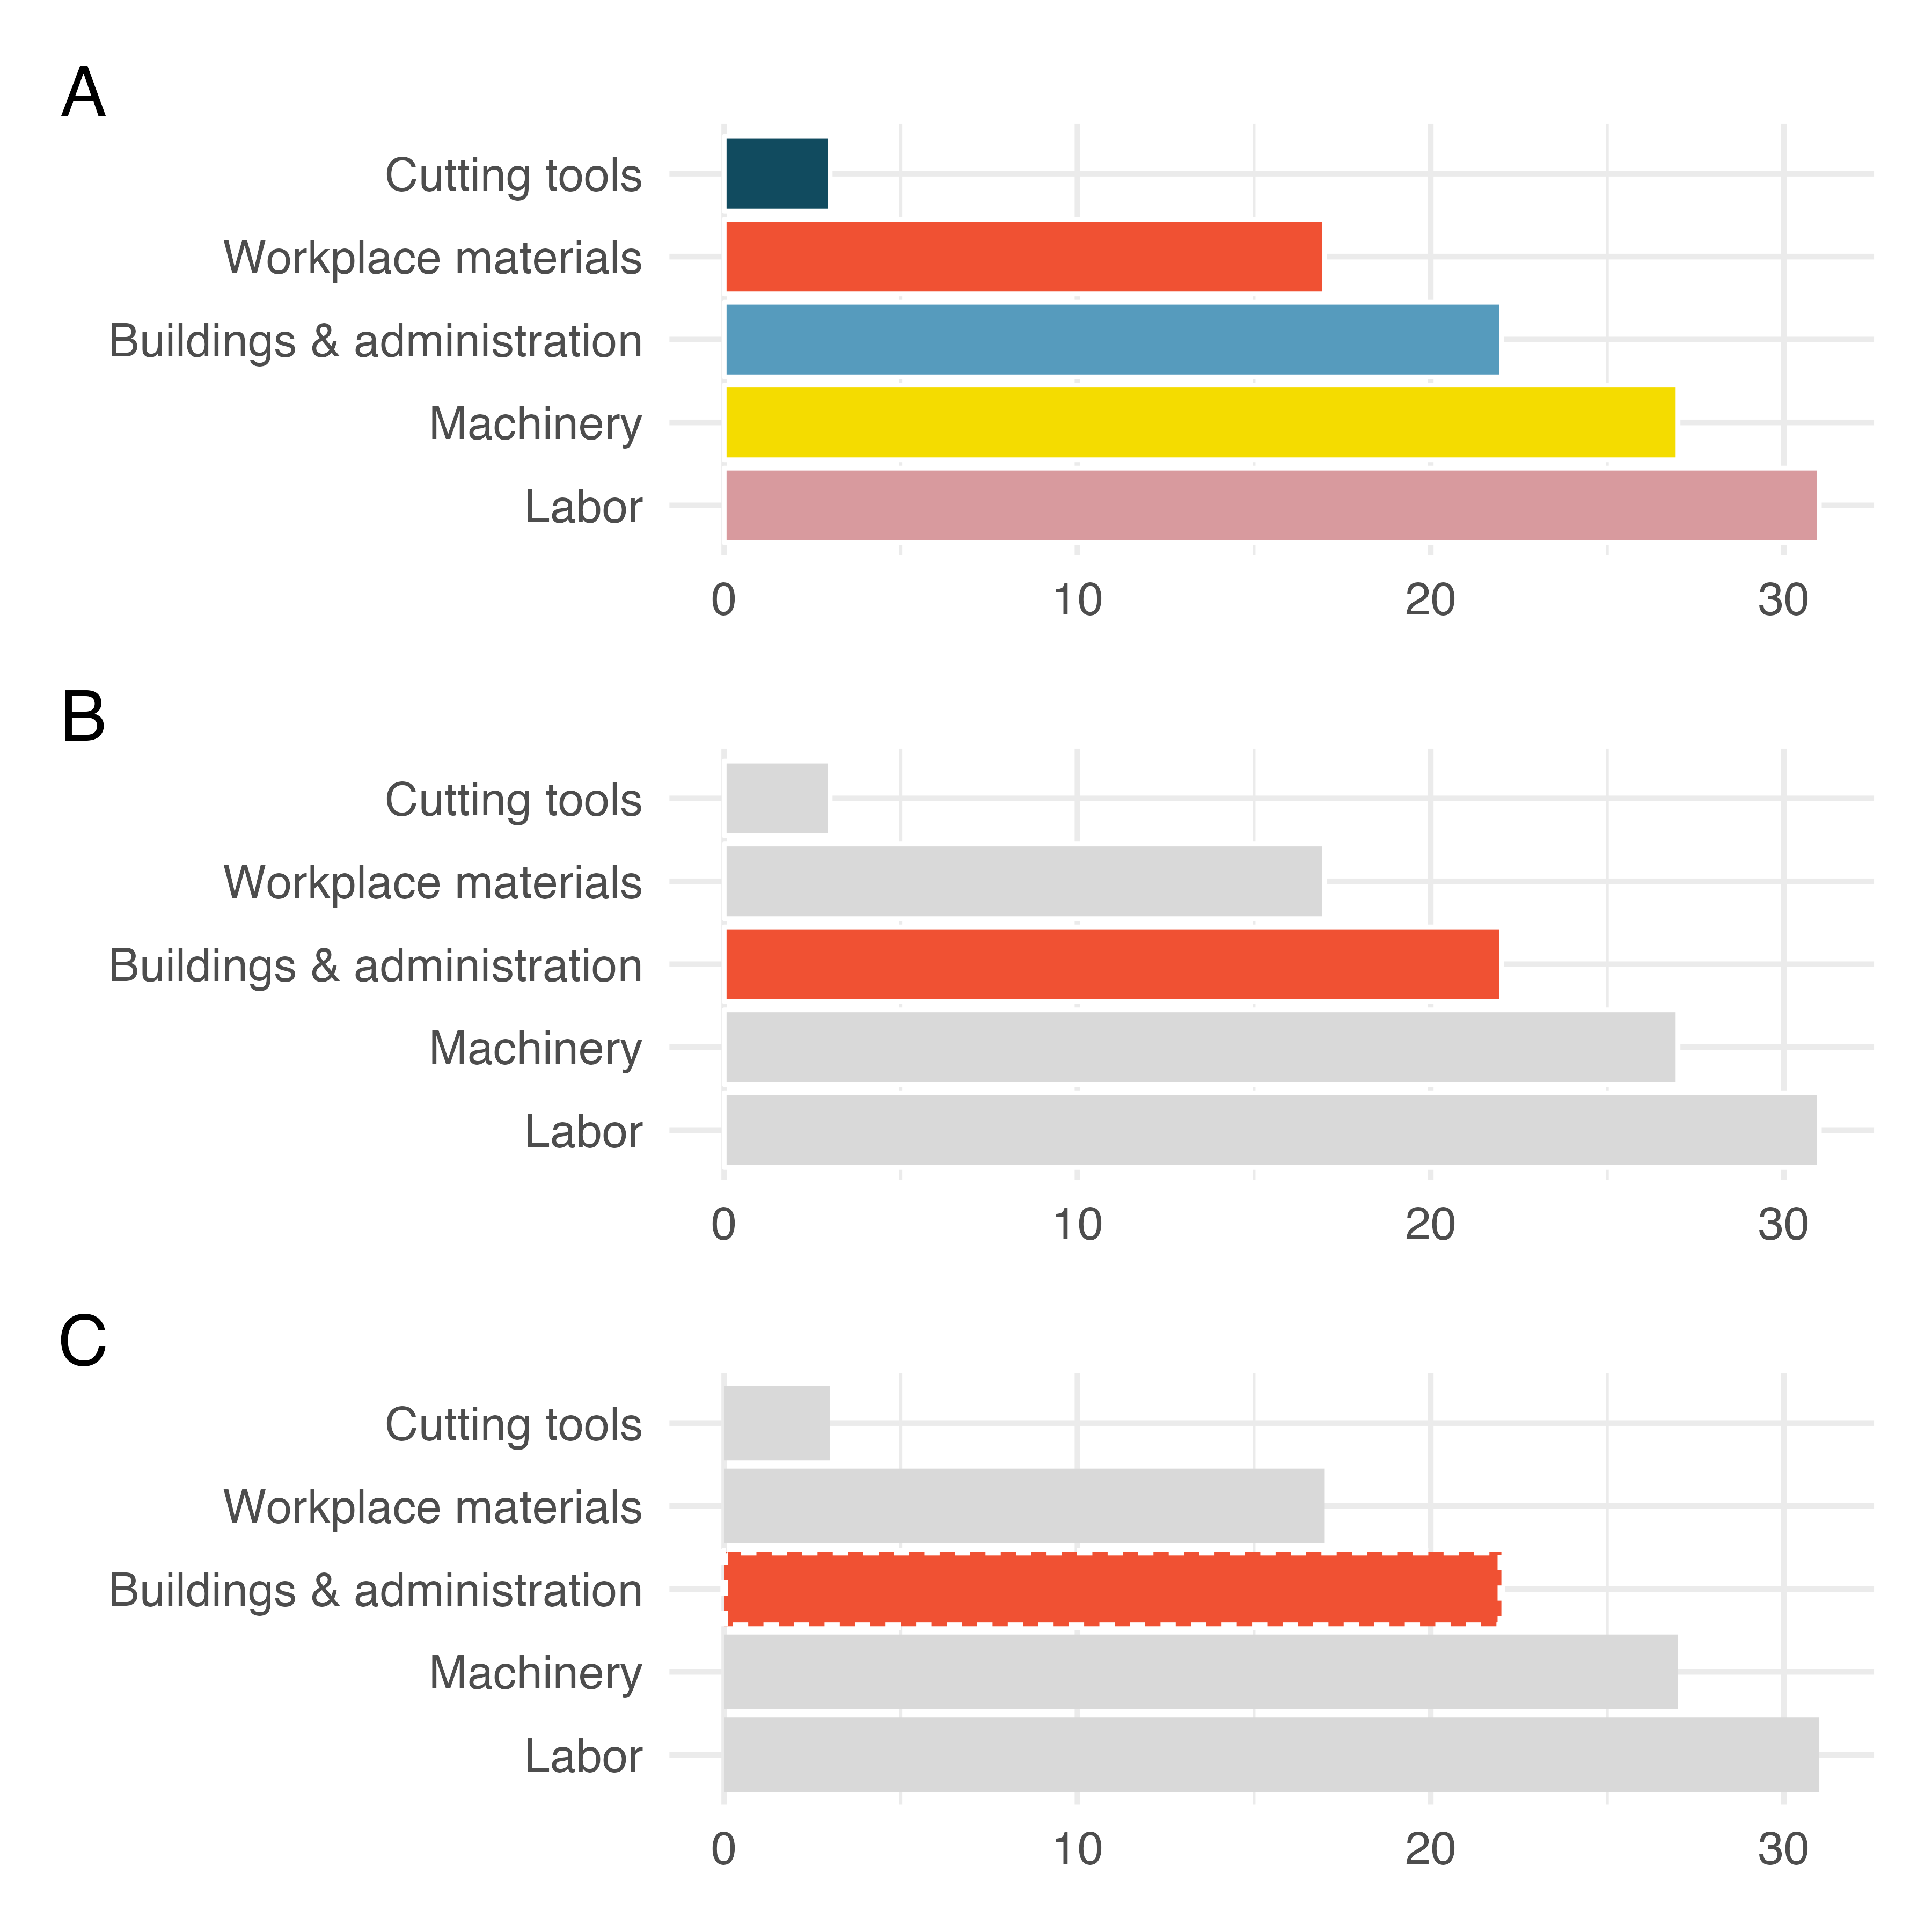 The default coloring in the first bar plot does nothing for the understanding of the data. In the second plot, the color draws attention directly to the bar on Buildings and Administration.